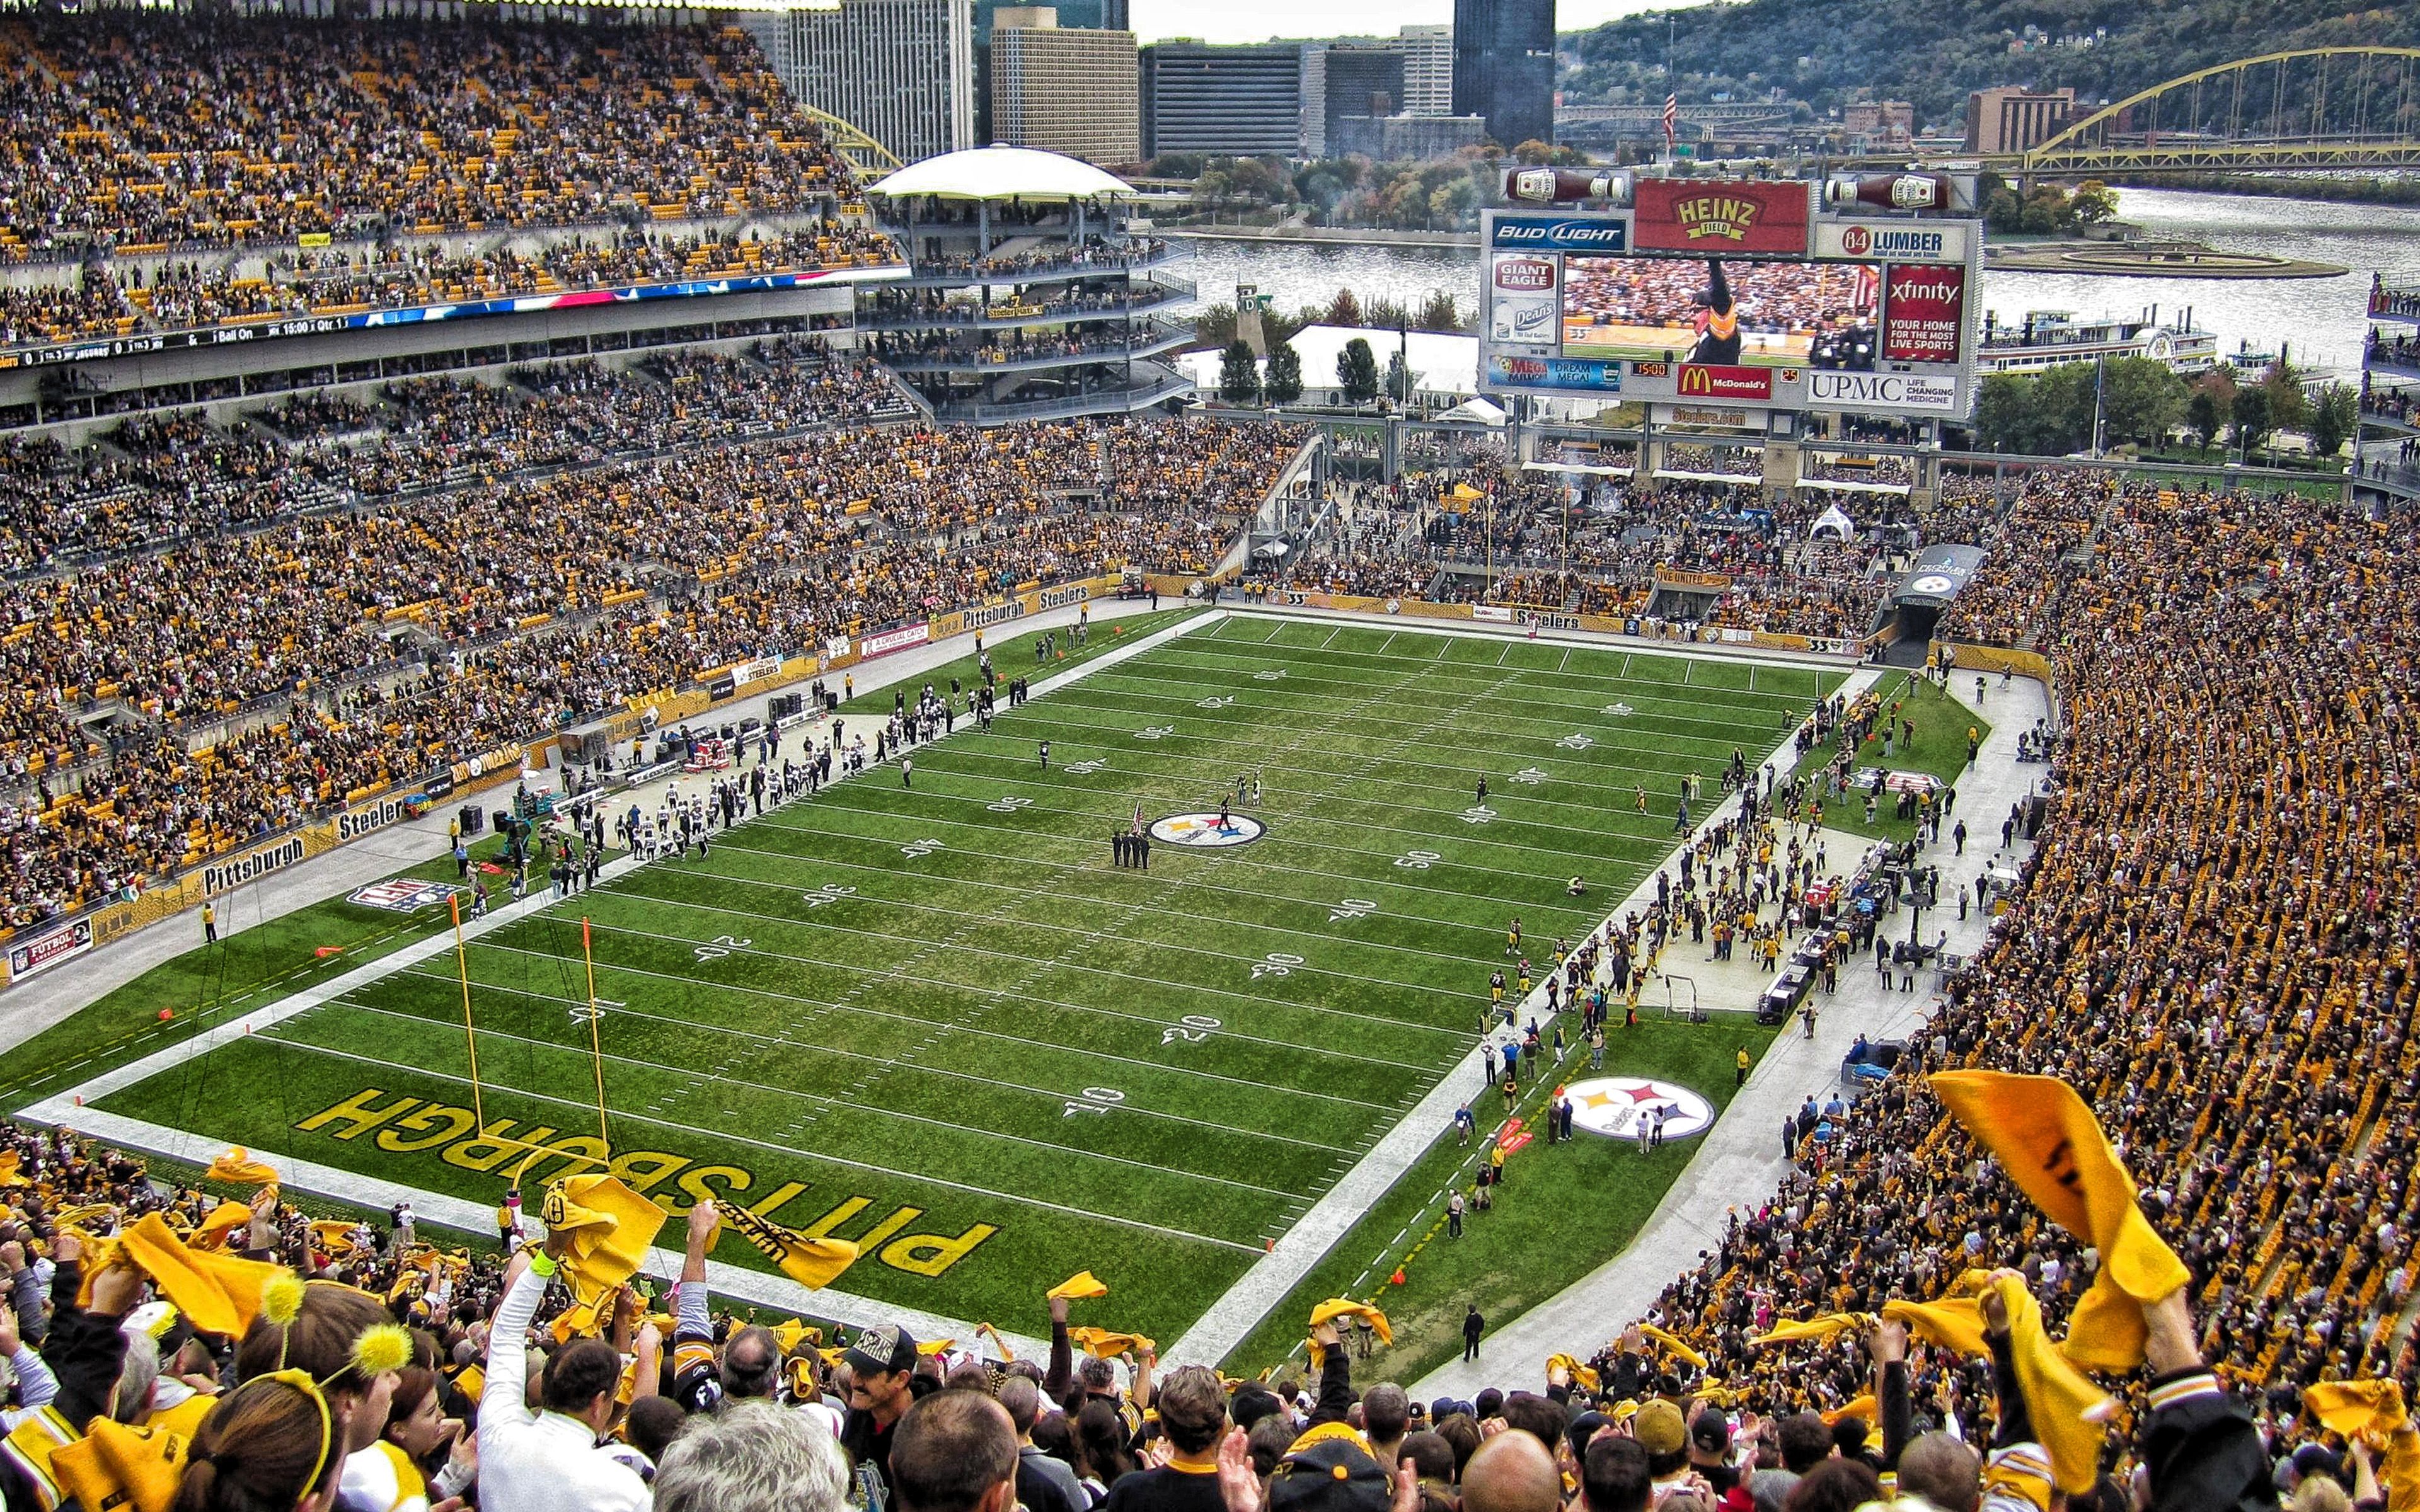 Download wallpaper Heinz Field, Pittsburgh Steelers stadium, Pittsburgh, Pennsylvania, USA, Pittsburgh Steelers, NFL, National Football League, Pittsburgh Panthers stadium, NCAA, American football for desktop with resolution 3840x2400. High Quality HD